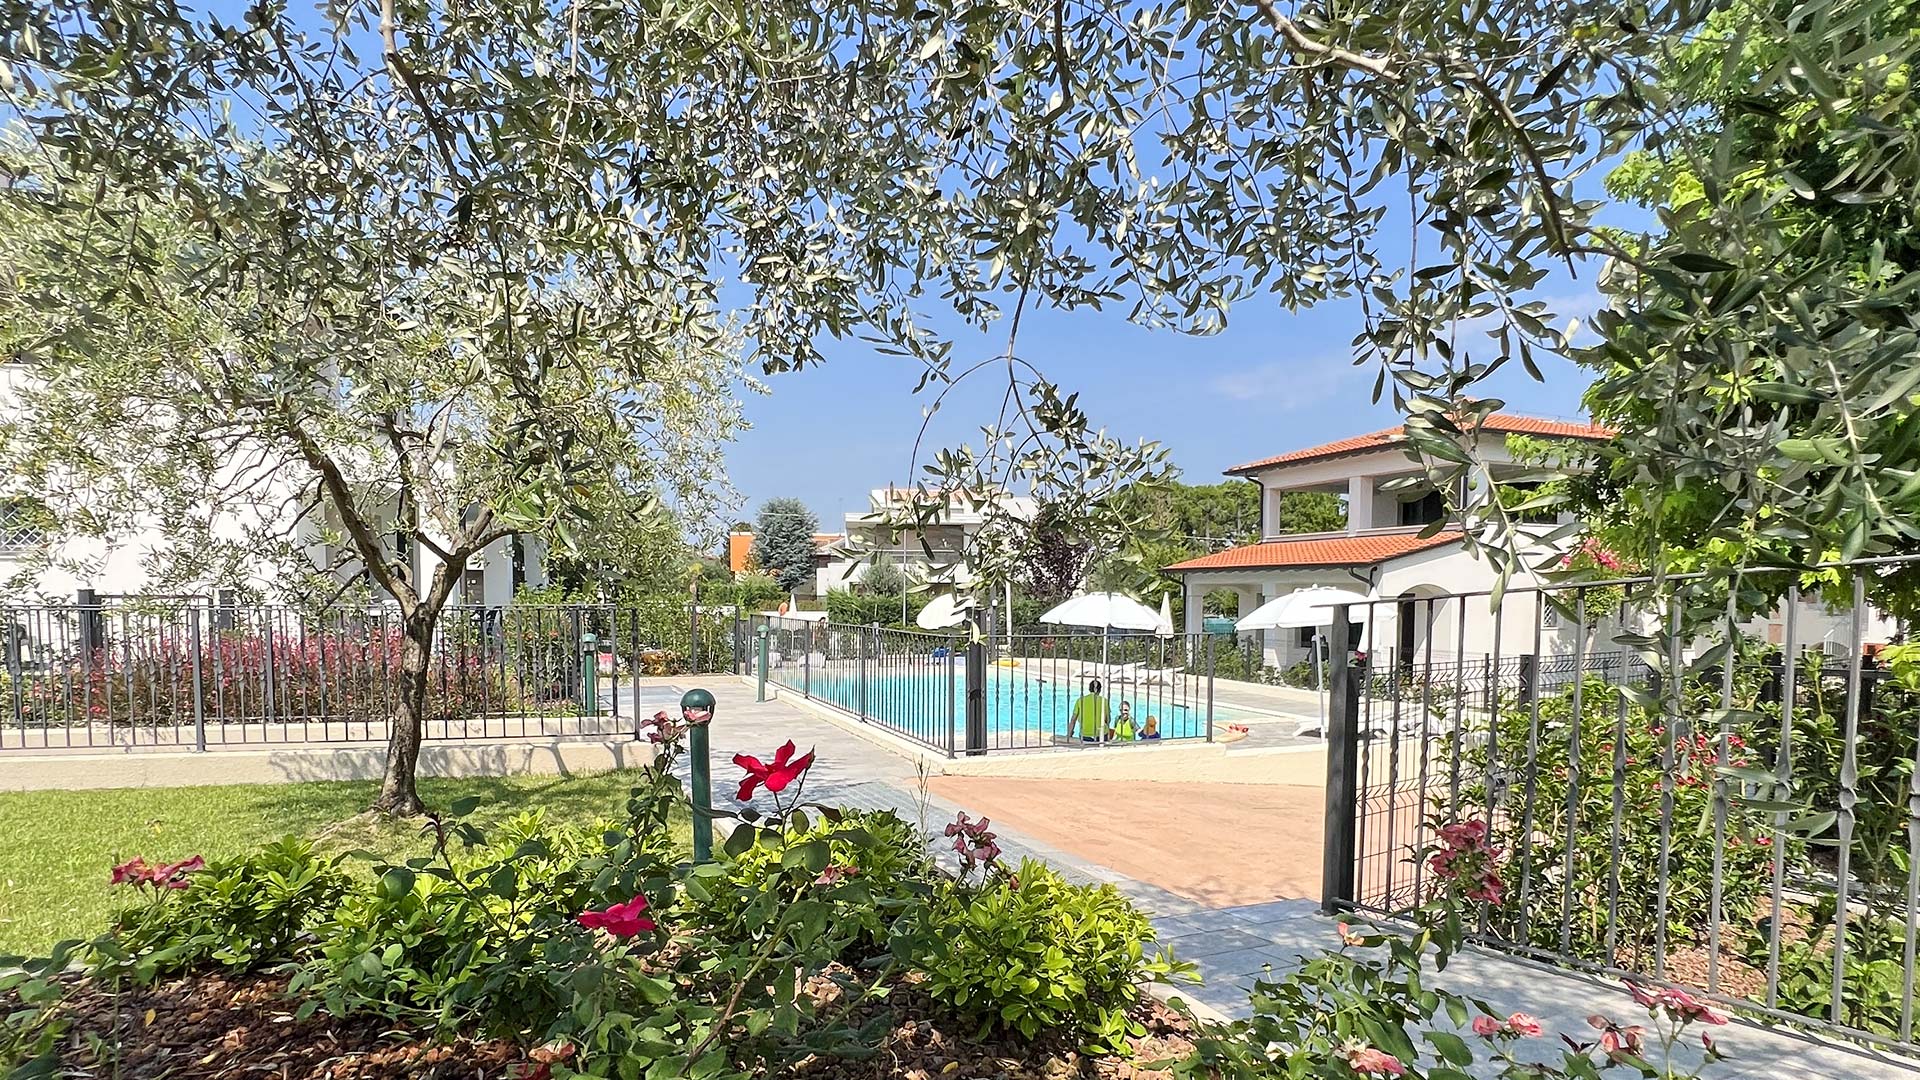 Appartamenti Residence Fiore Rosso Sirmione - Apartments Residence